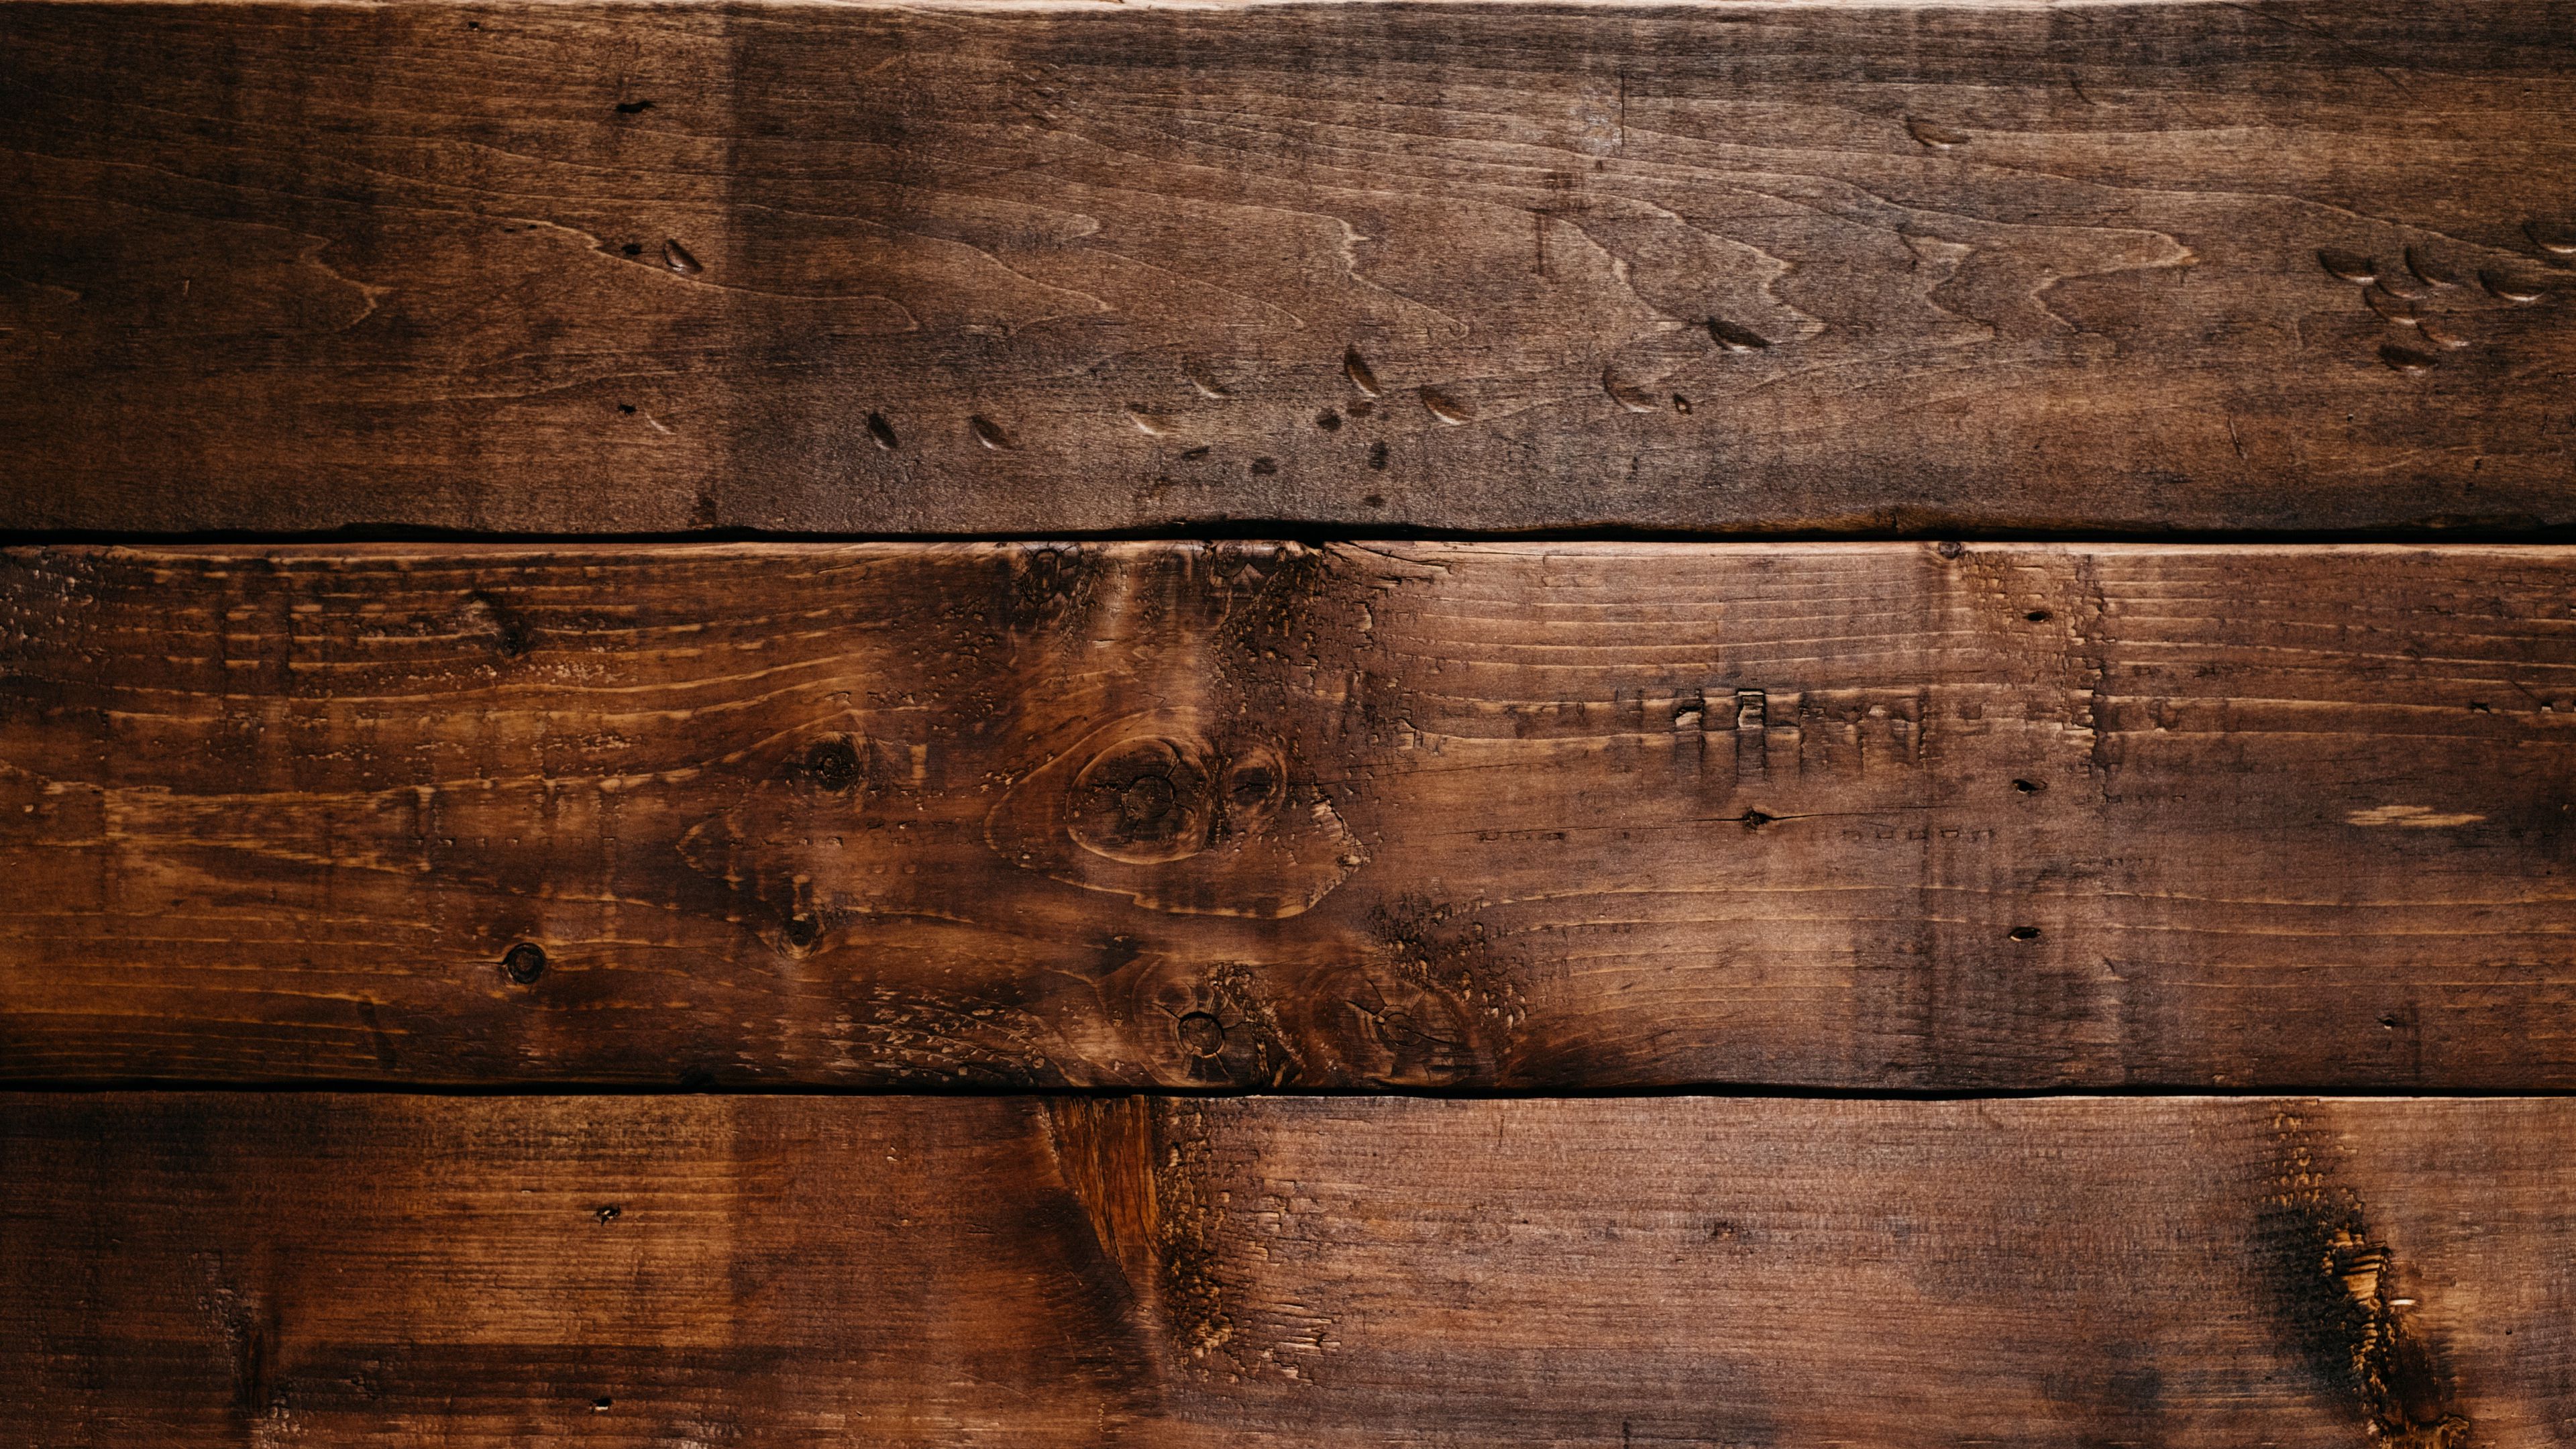 Download wallpaper 3840x2160 boards, wood, texture 4k uhd 16:9 hd background